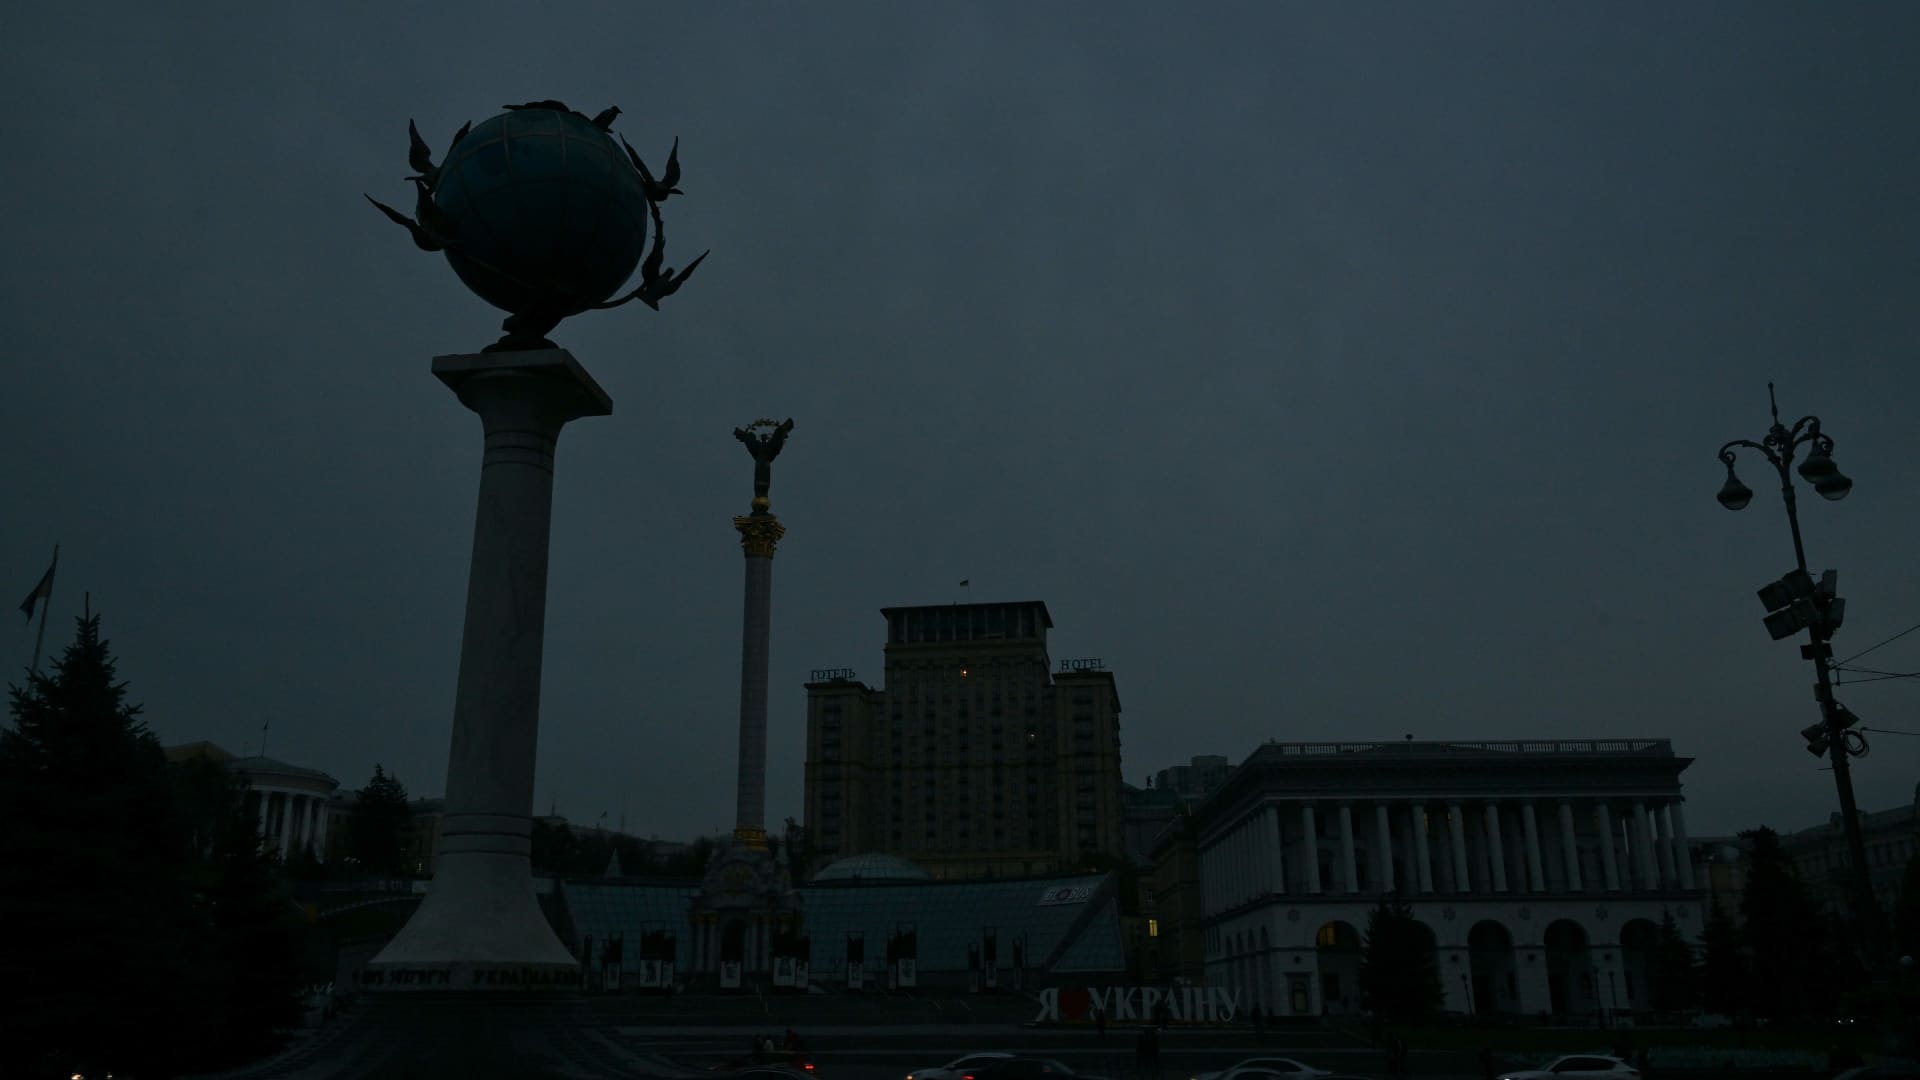 This photograph shows The Independence Square in Kyiv during a rolling blackout of parts of districts of the Ukrainian capital following rocket attacks last two weeks to critical infrastructures, on October 24, 2022, amid the Russian invasion of Ukraine.